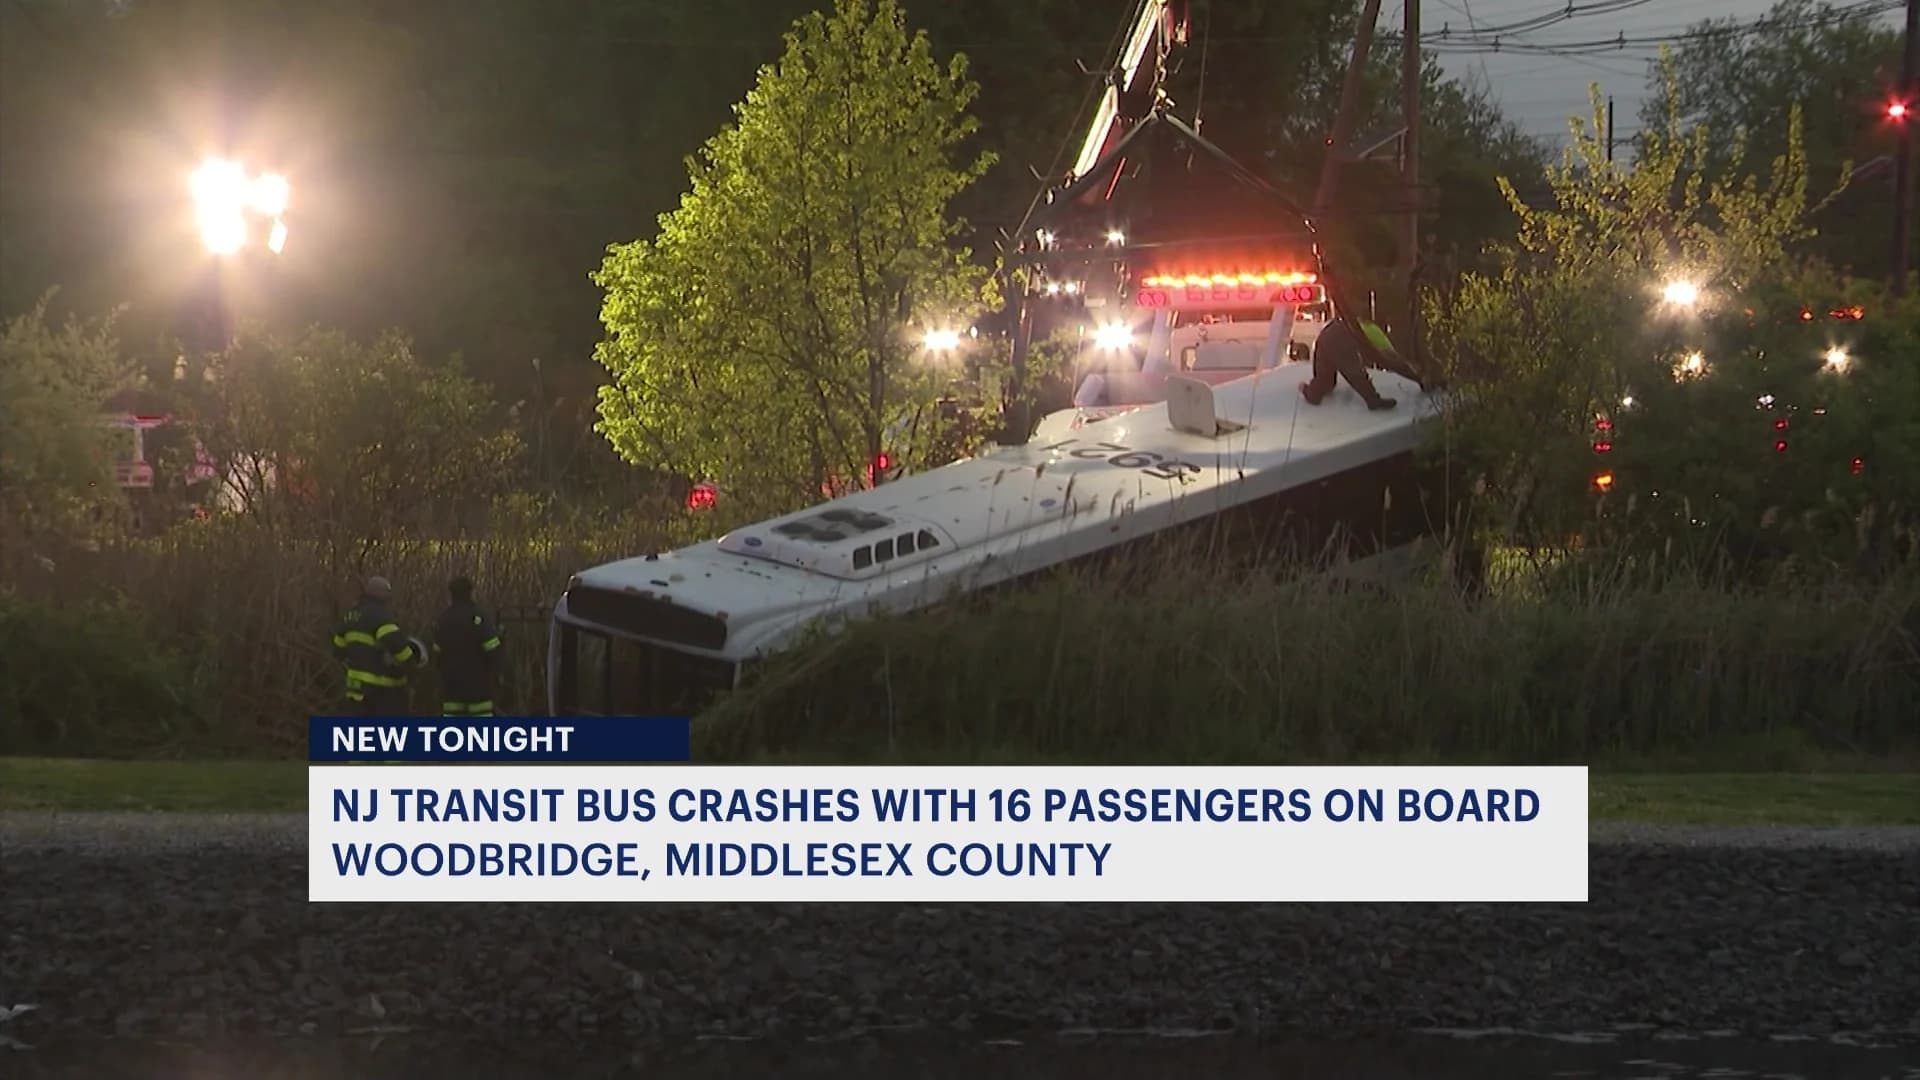 Police: 7 people injured after NJ Transit bus crashes into ditch in Woodbridge